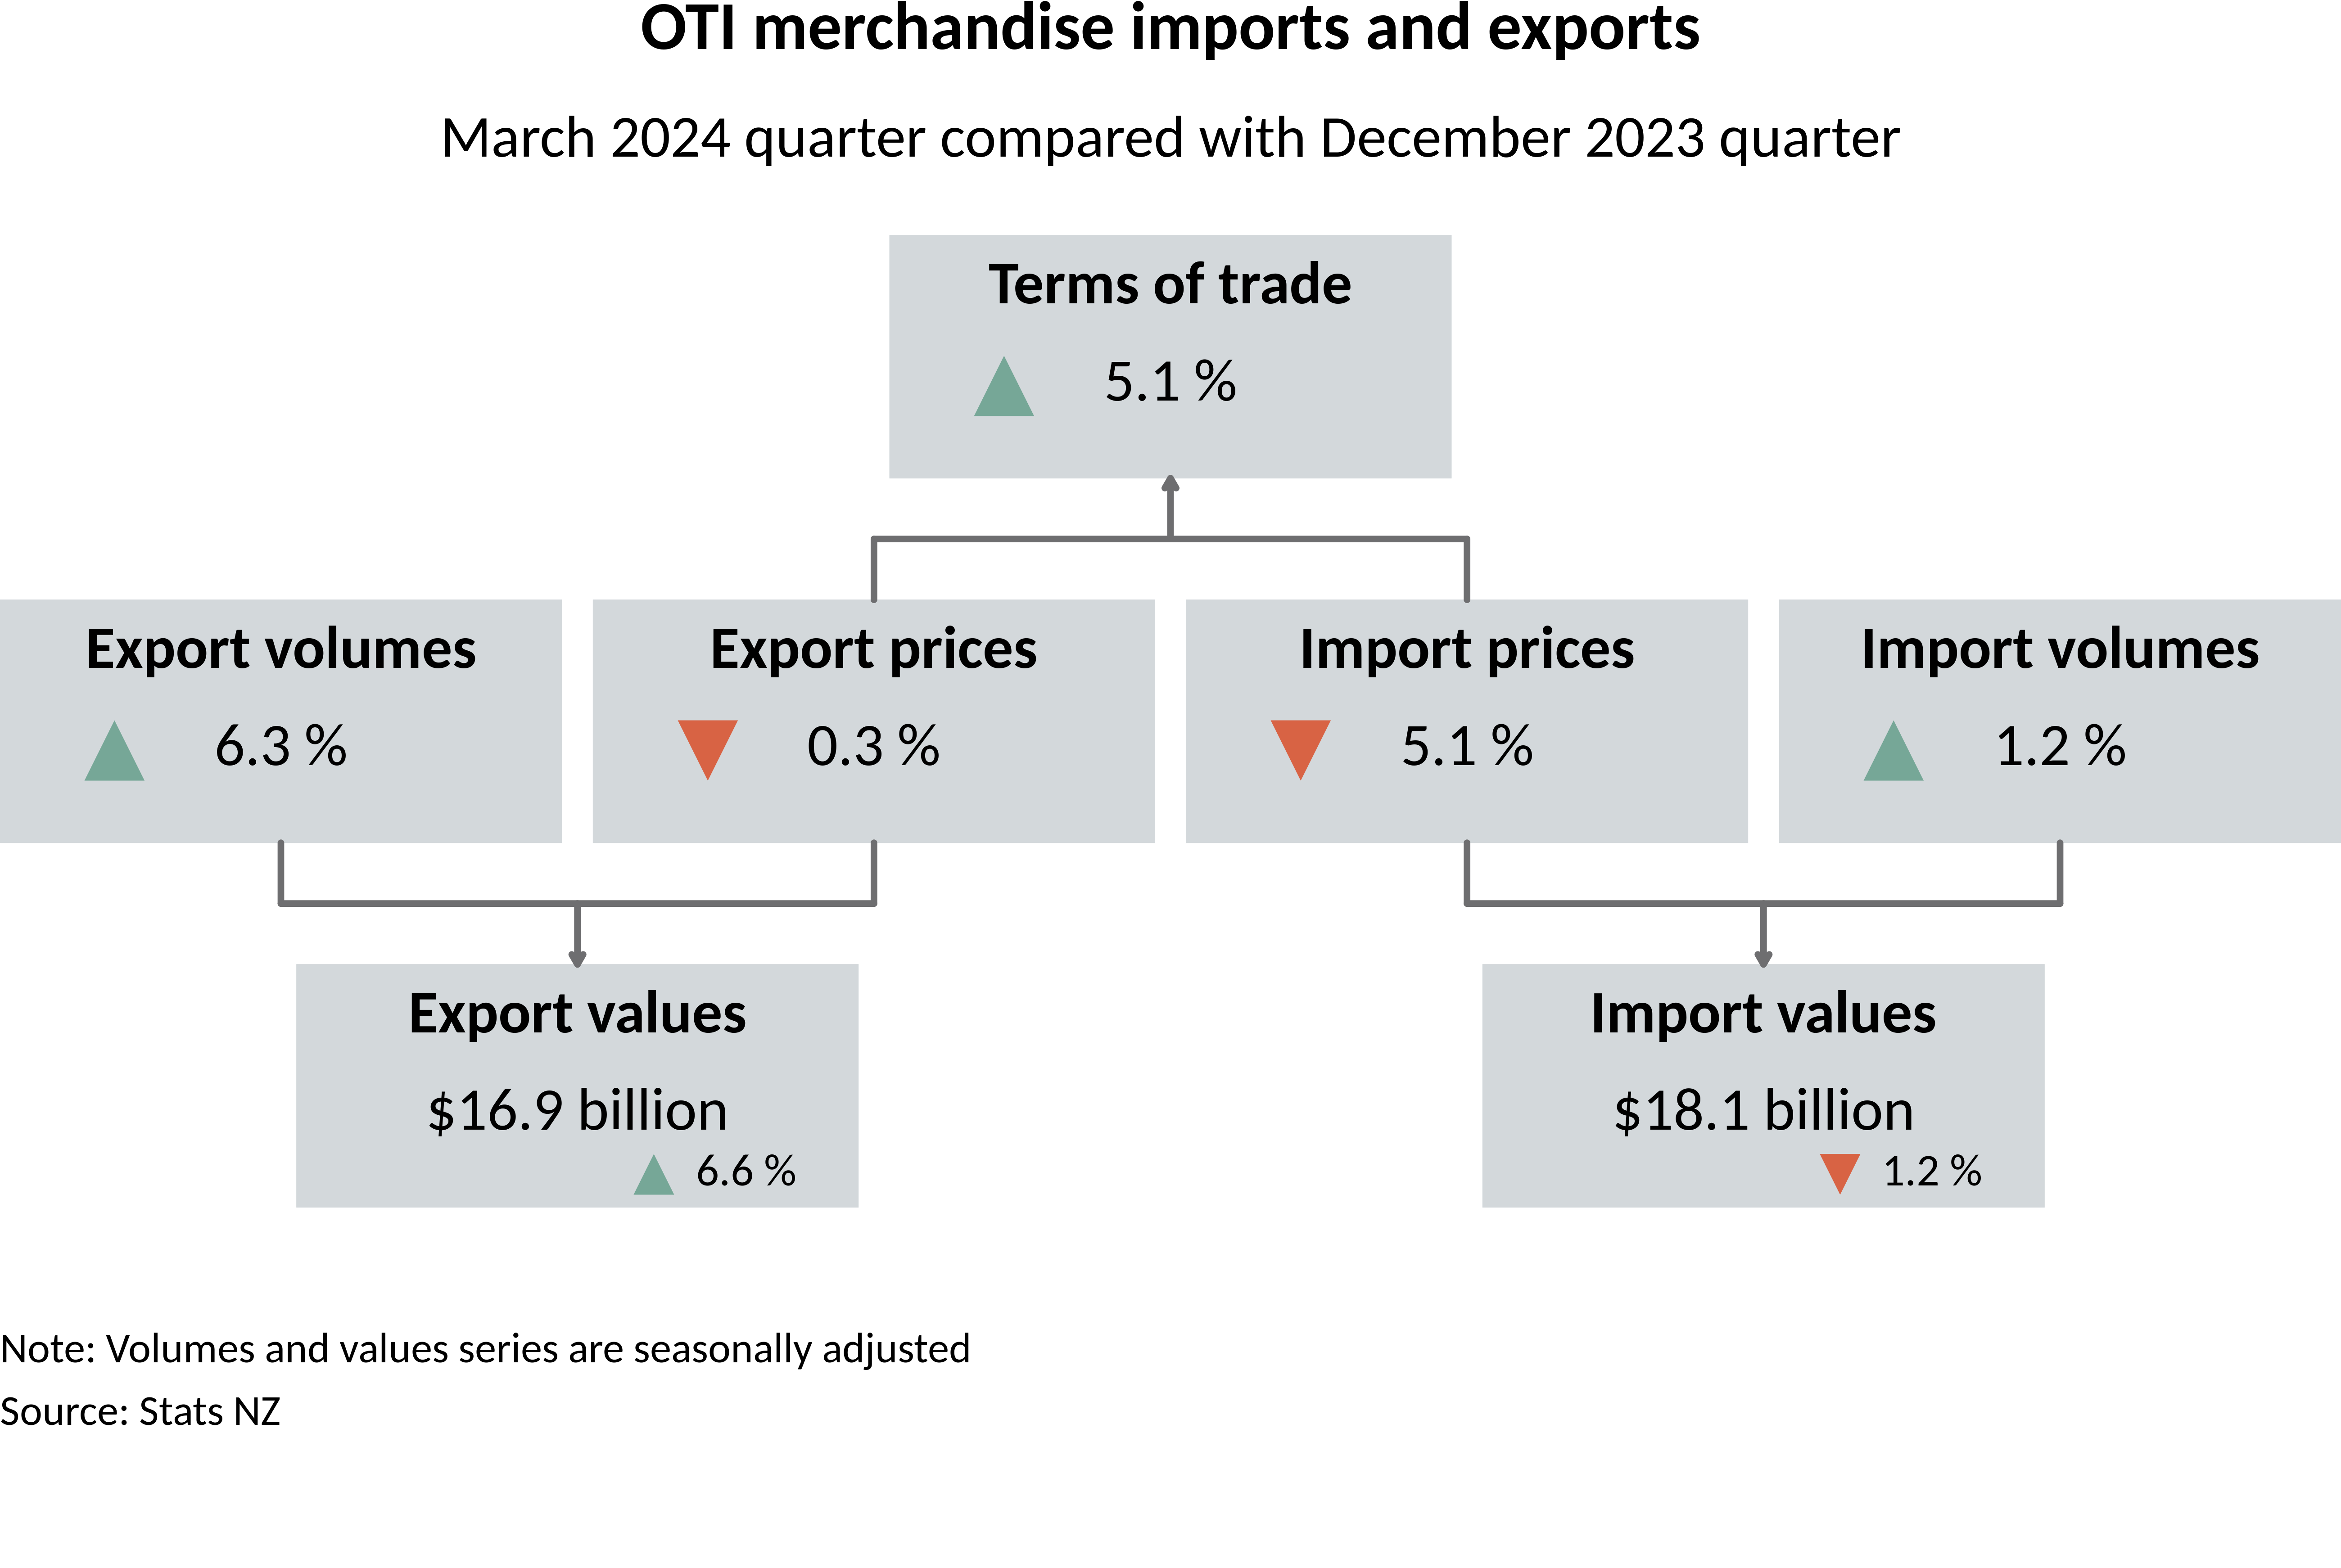 Flow chart showing OTI mechandise imports and exports for the March 2024 quarter compared with December 2023 quarter. See link to text alternative under image.